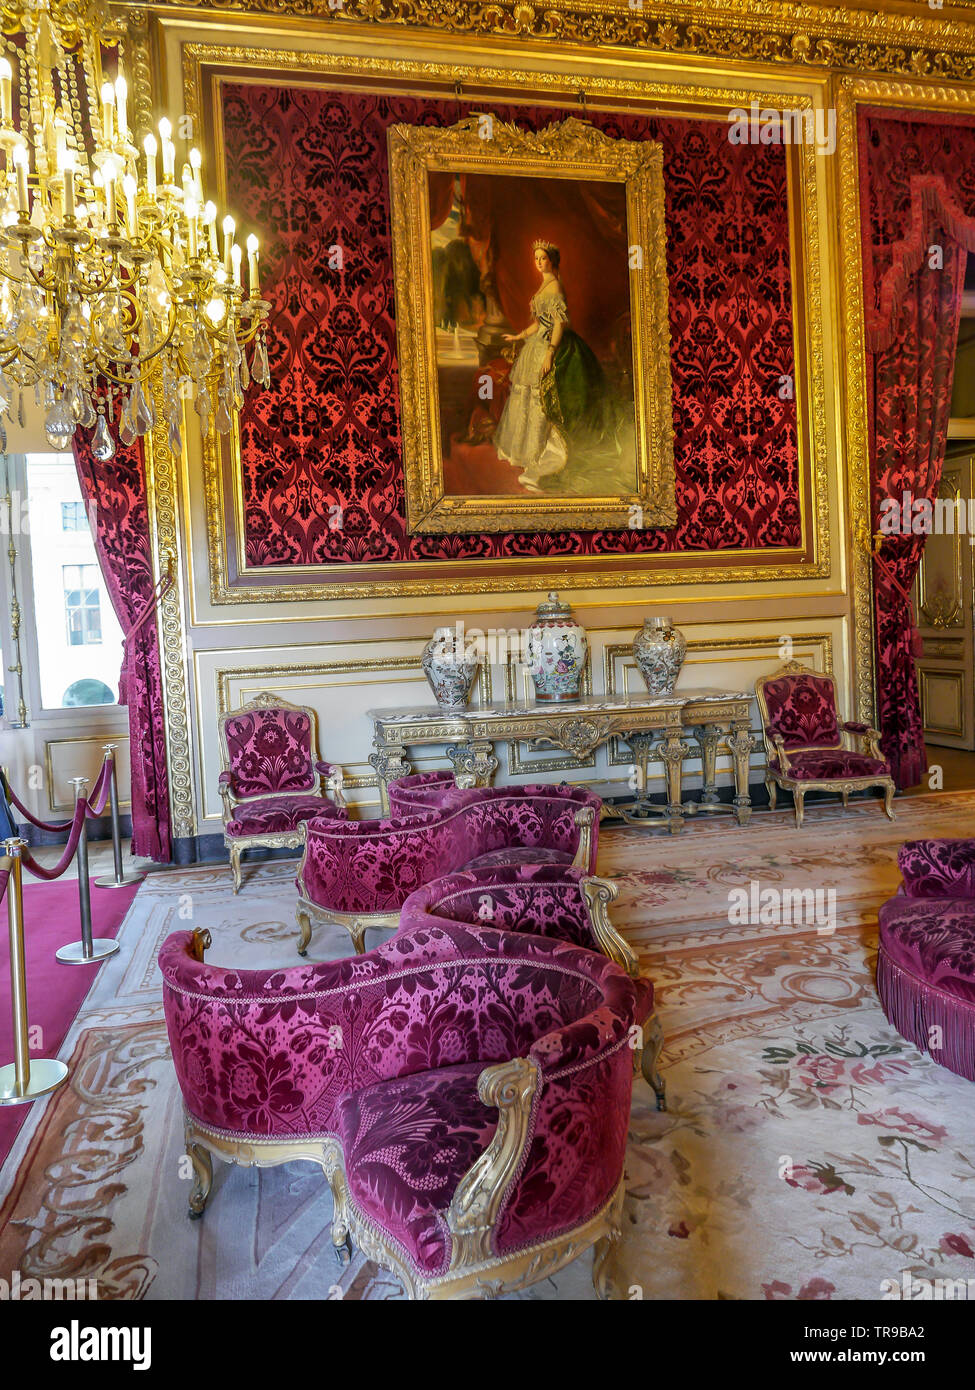 Paris France August 28 2013 Napoleon Iii Apartments With